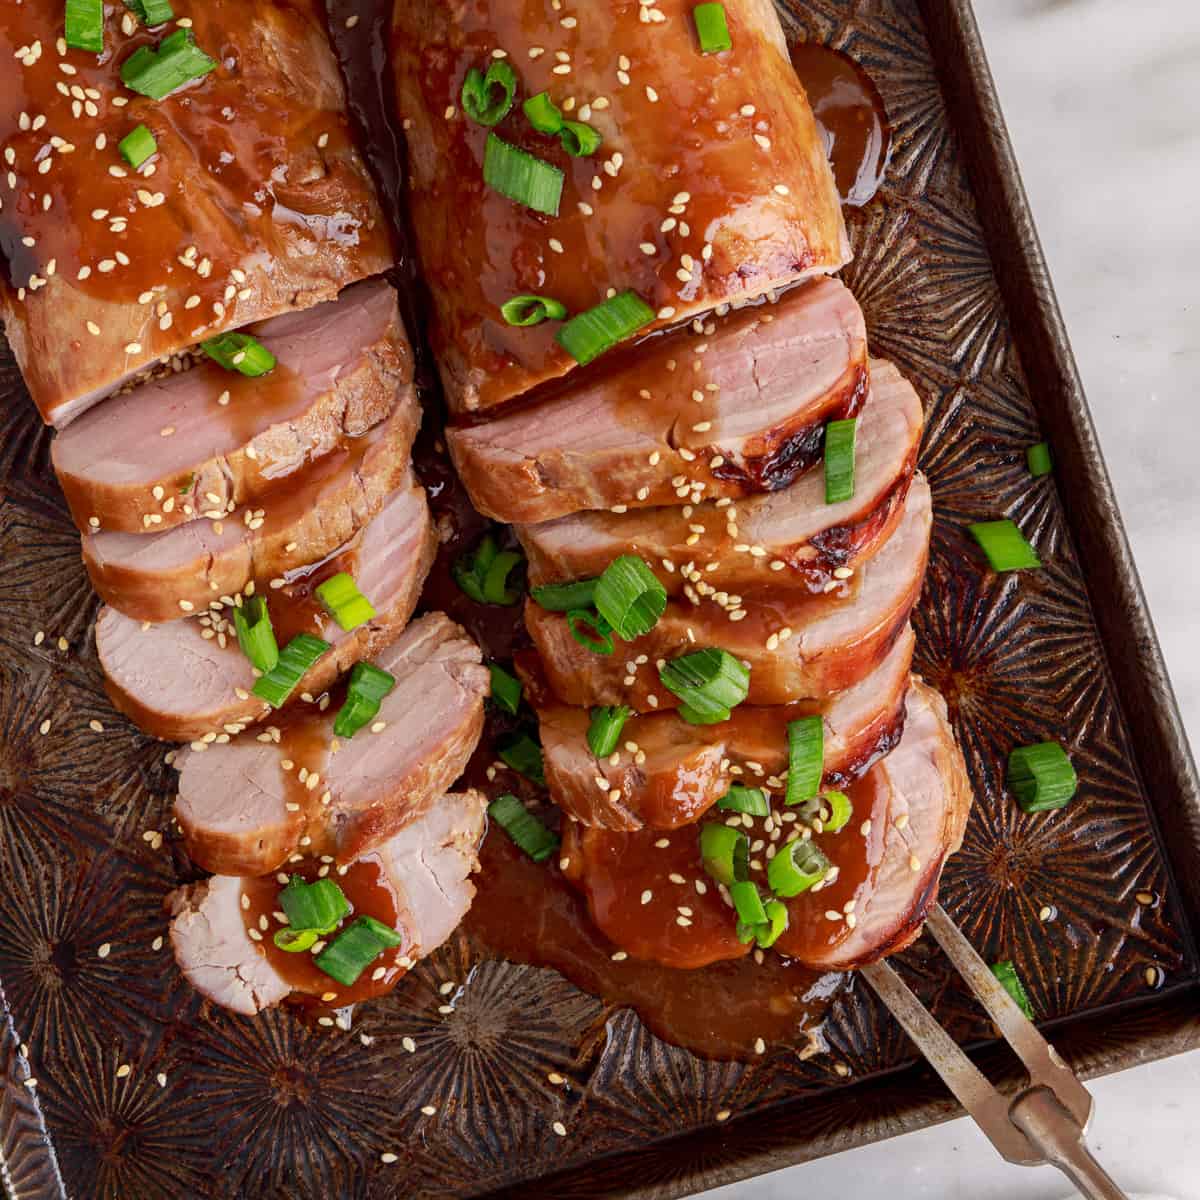 What to serve with pork tenderloin